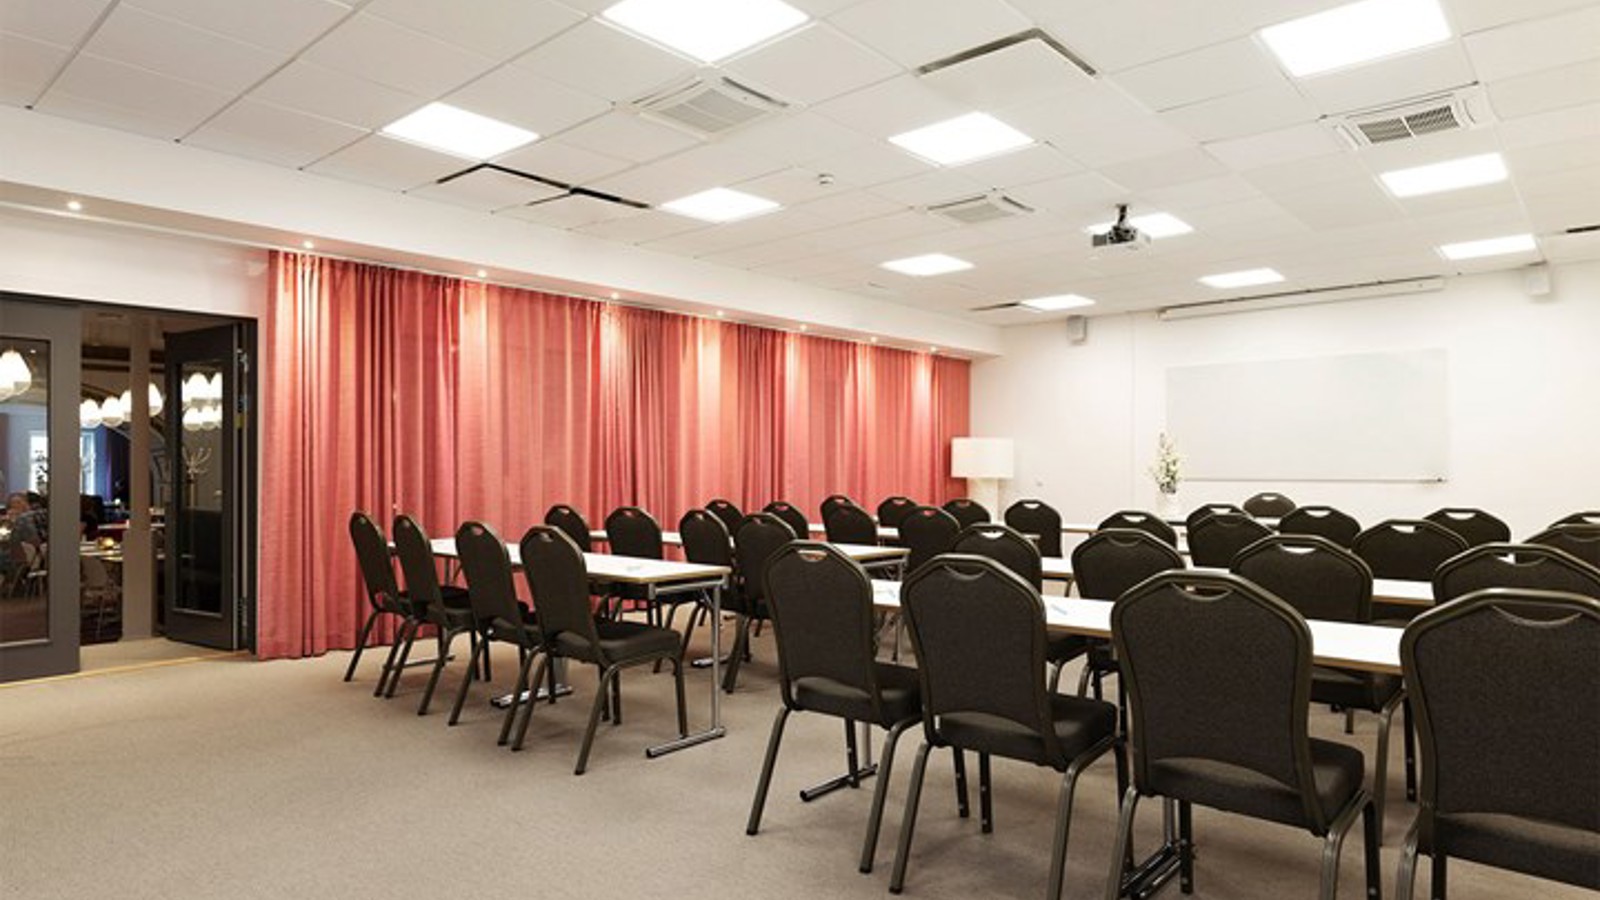 Conference room with lined up chairs, red drapery and light walls